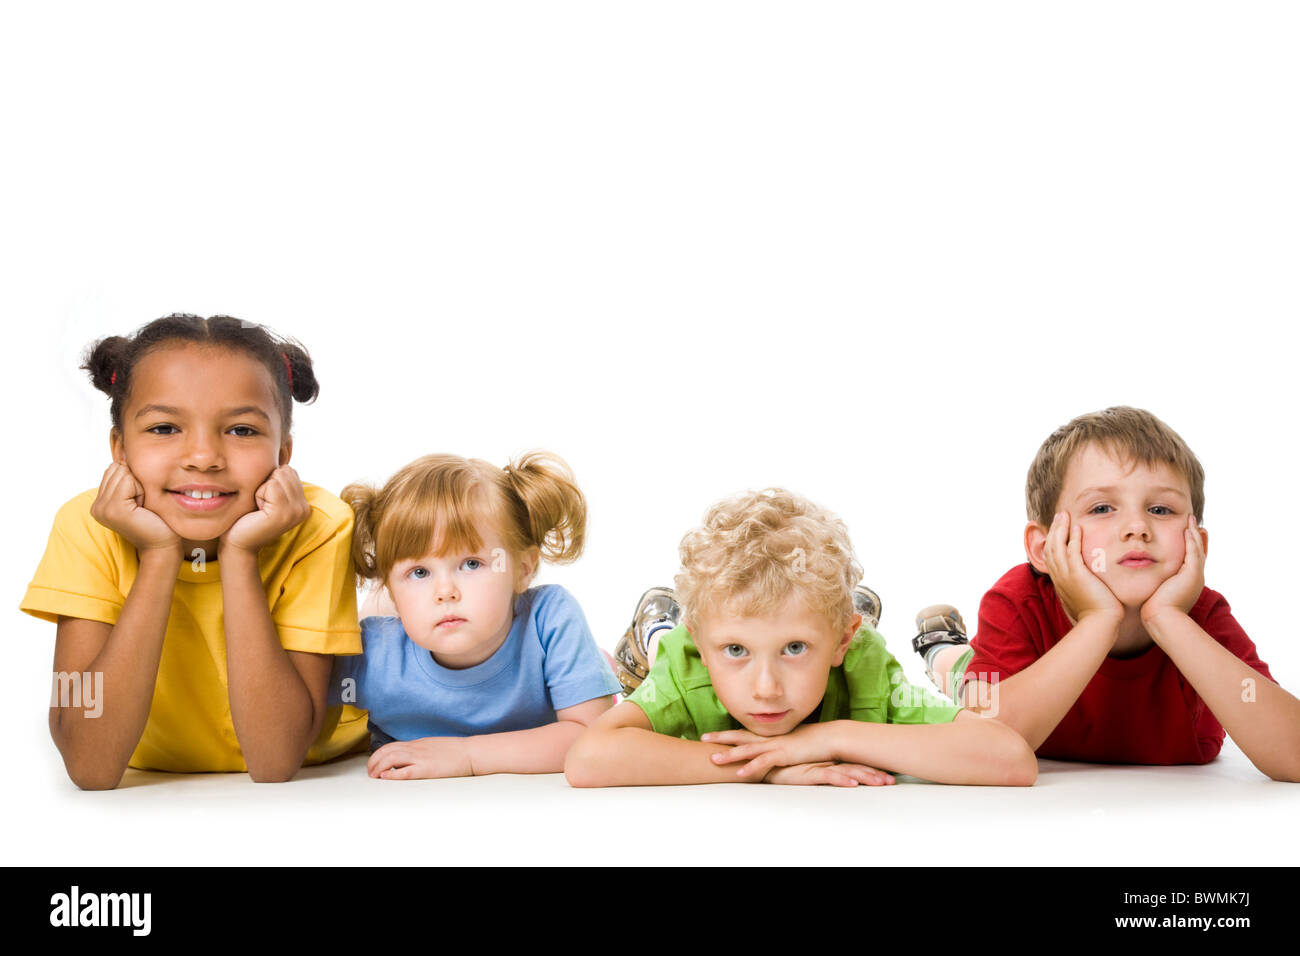 Portrait of four children lying in a line Stock Photo